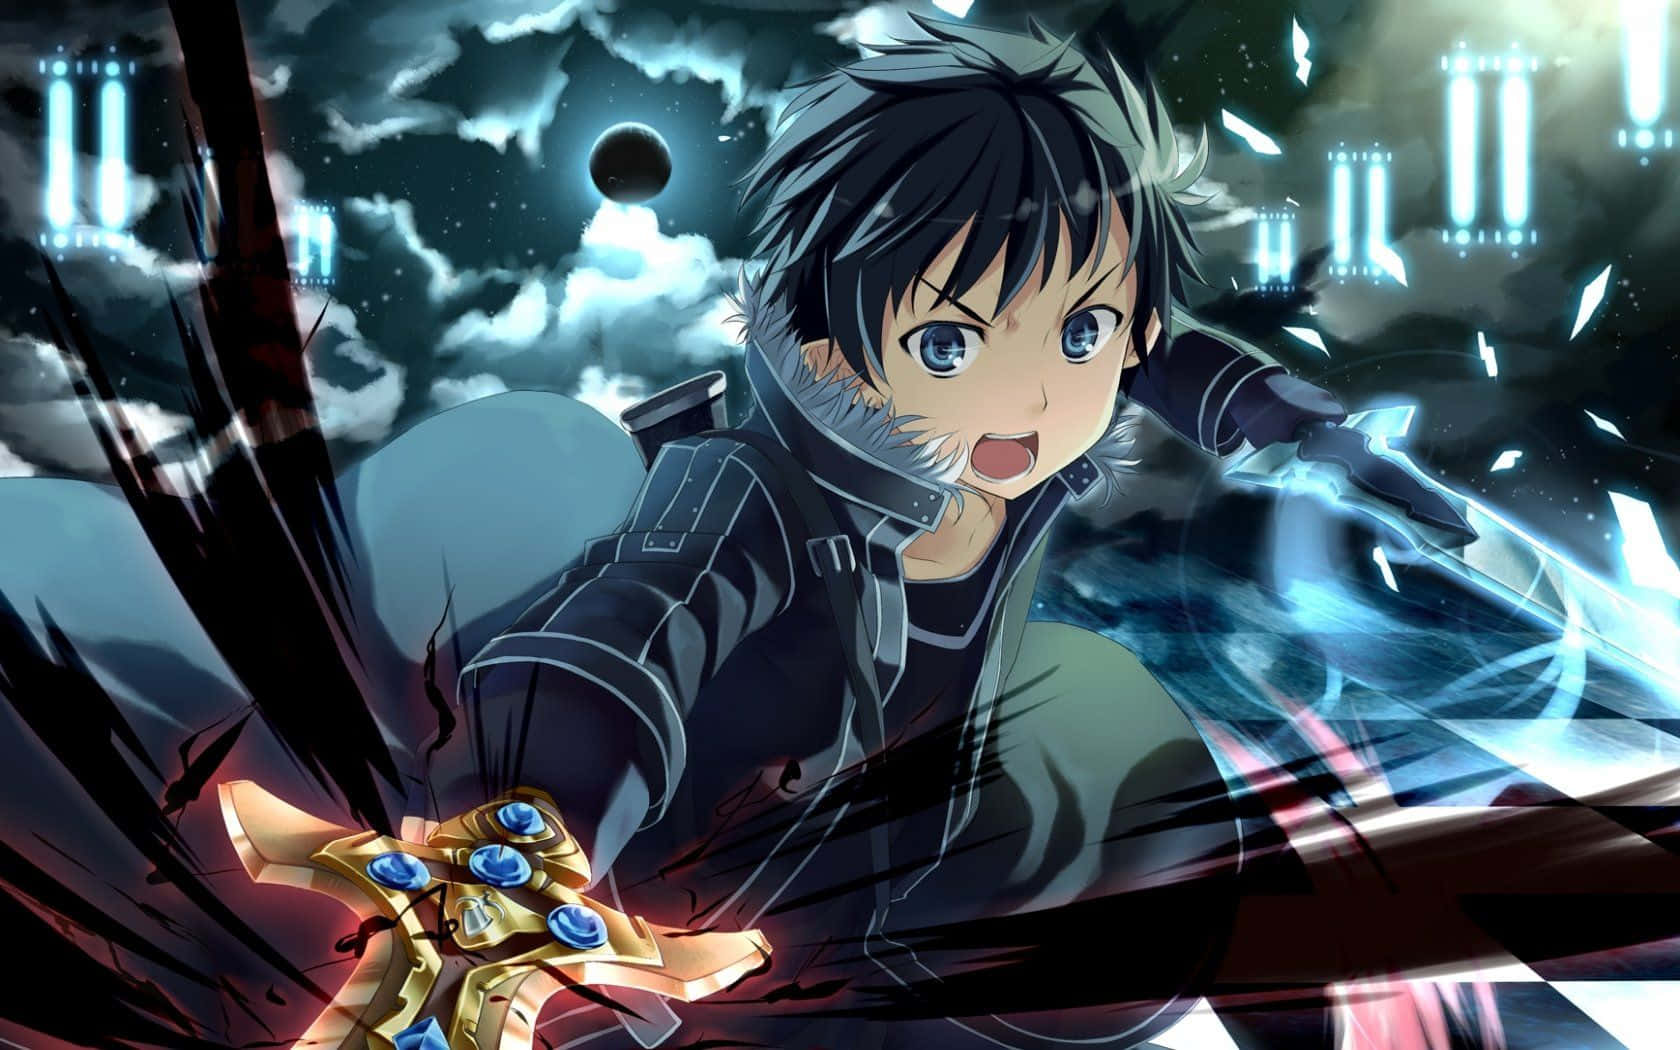 Join Us On A New Journey in Sao